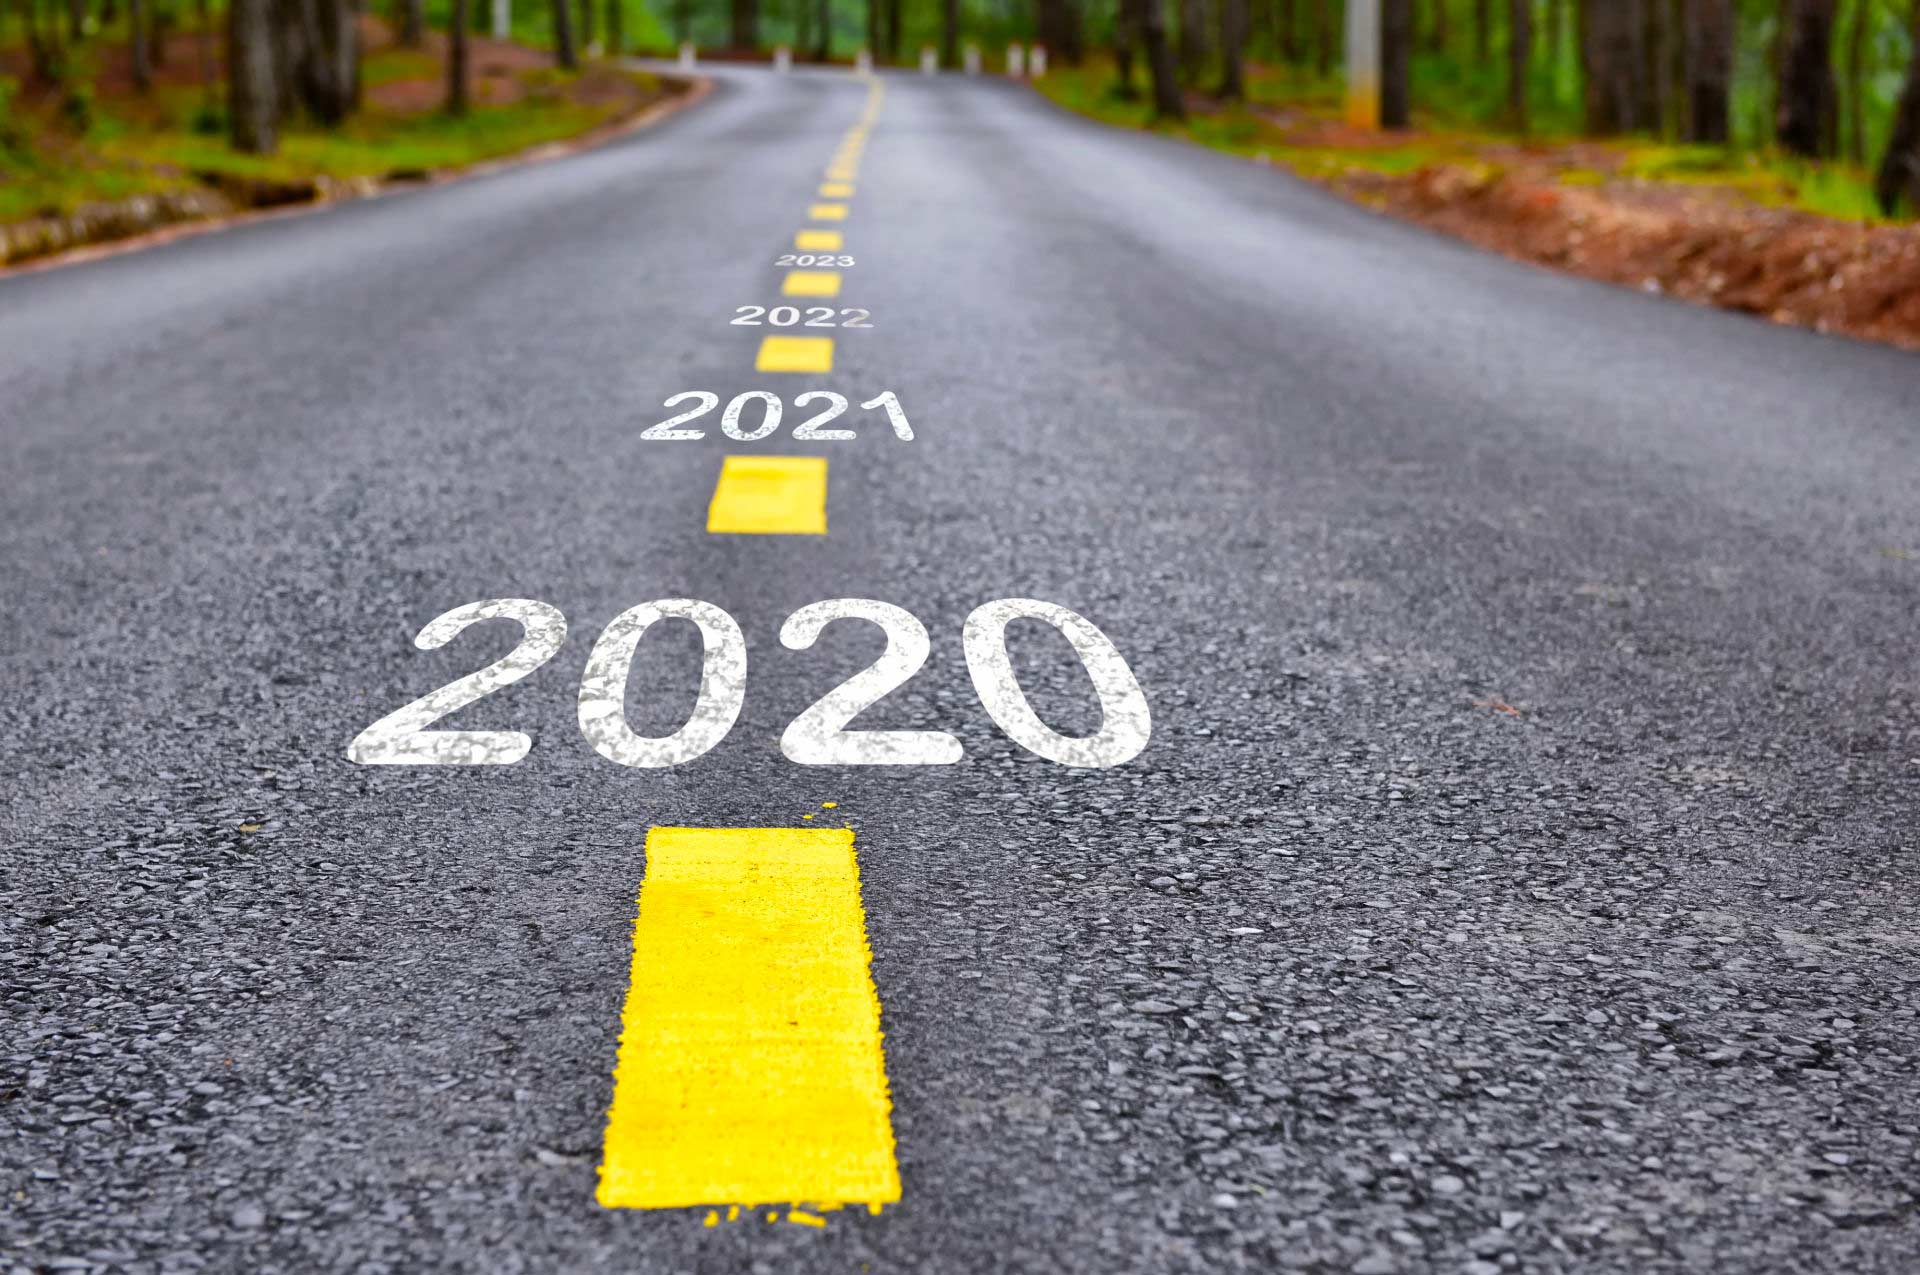 Asphalt road through forest with the years “2020,” “2021,” etc. stretching ahead toward the future.